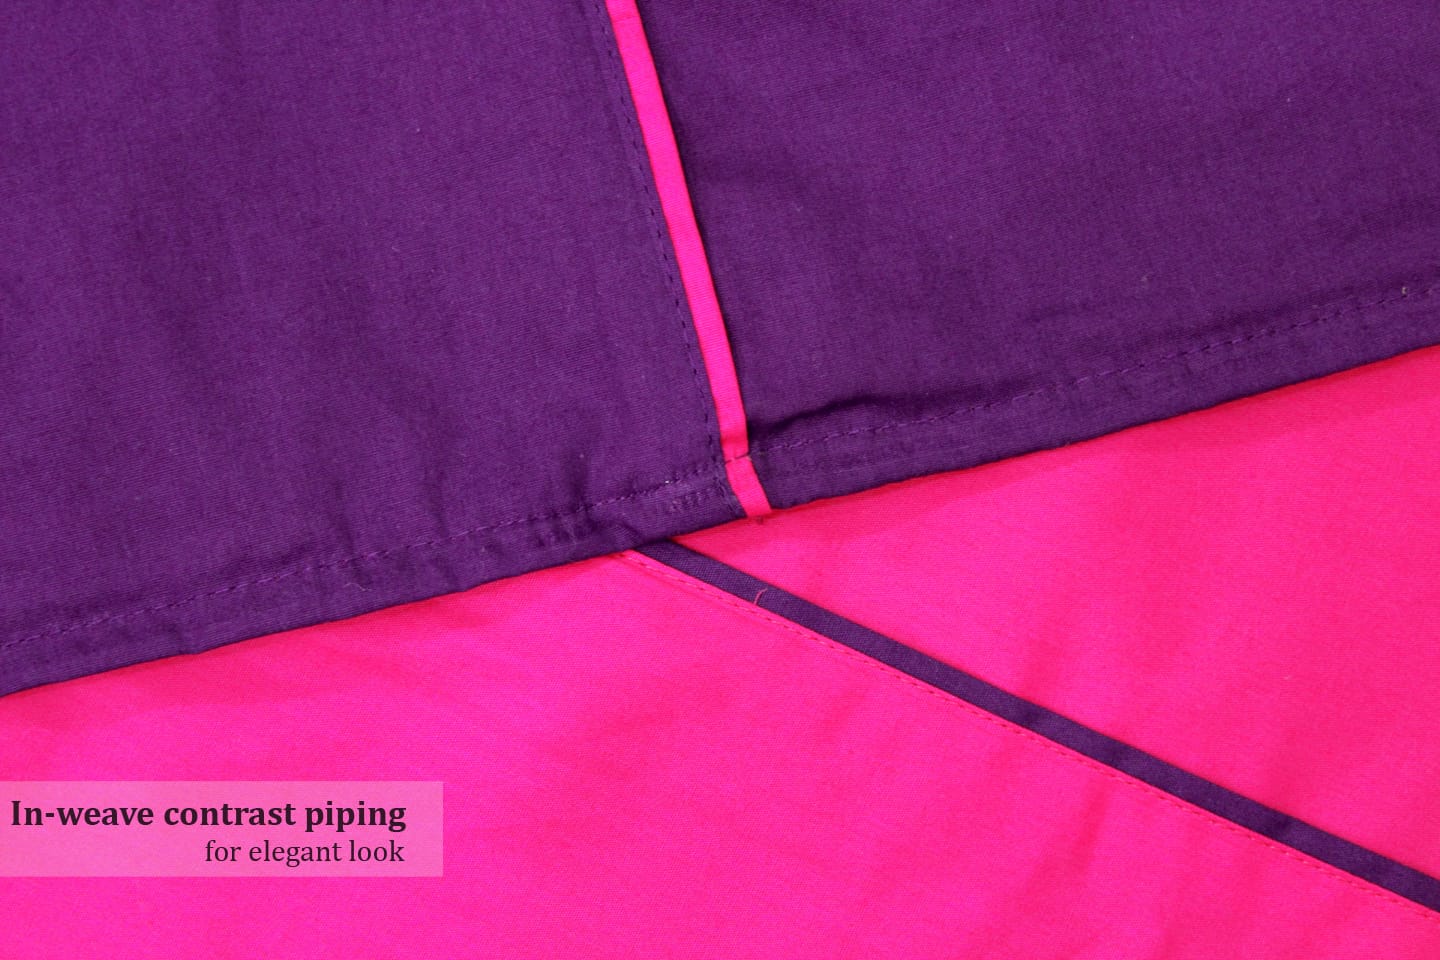 Soft Plain 210 Mercerised Cotton Duvet Cover In Pink & Purple Online At Best Prices